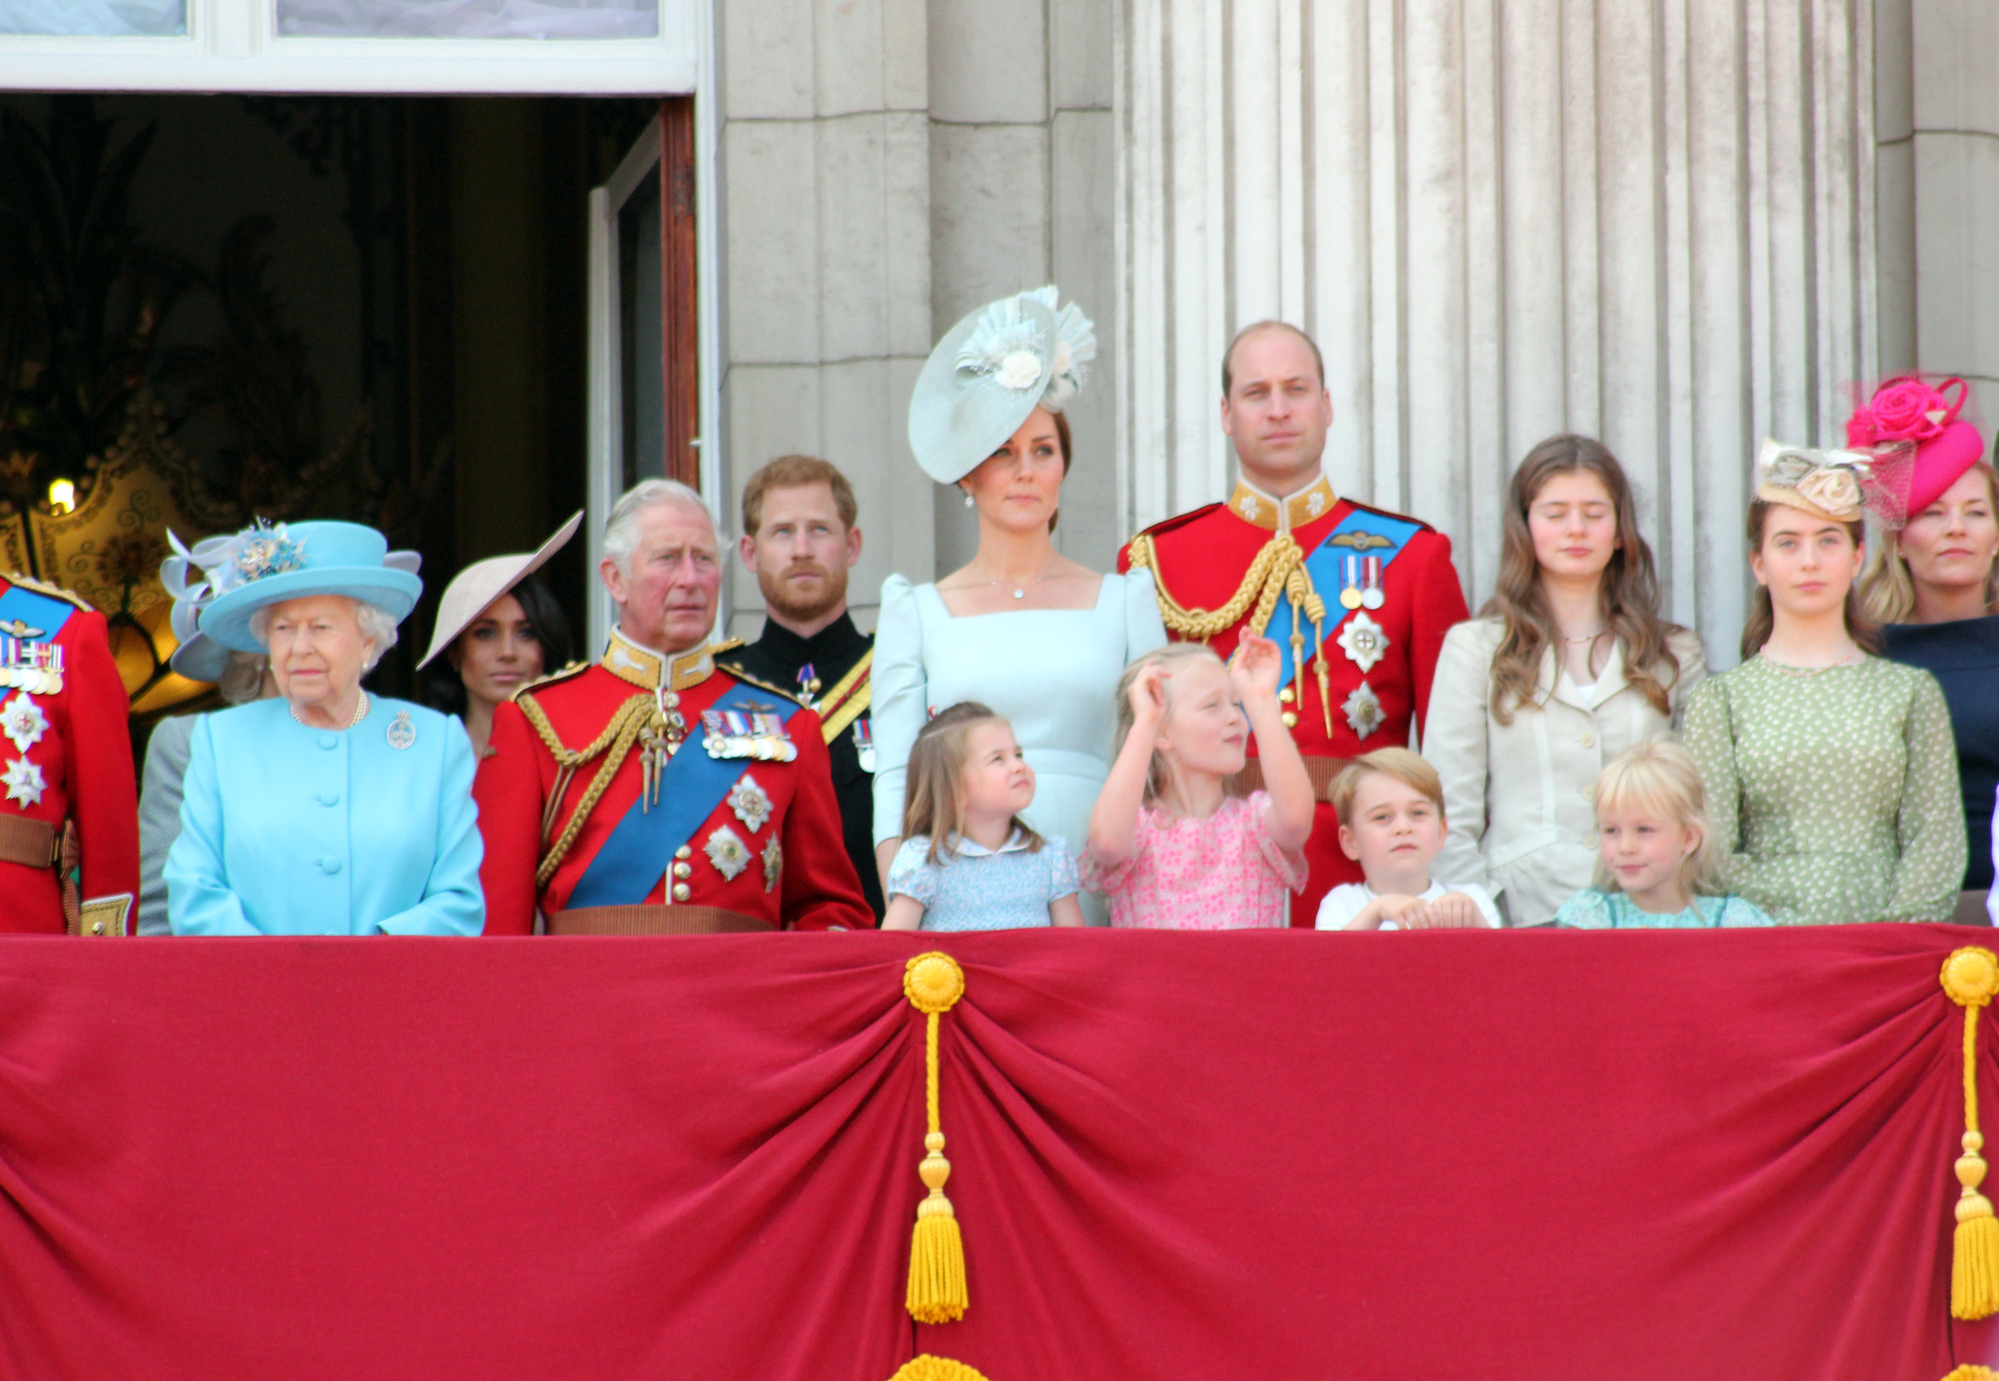 Queen Elizabeth and the royal family at Buckinham Palace in London